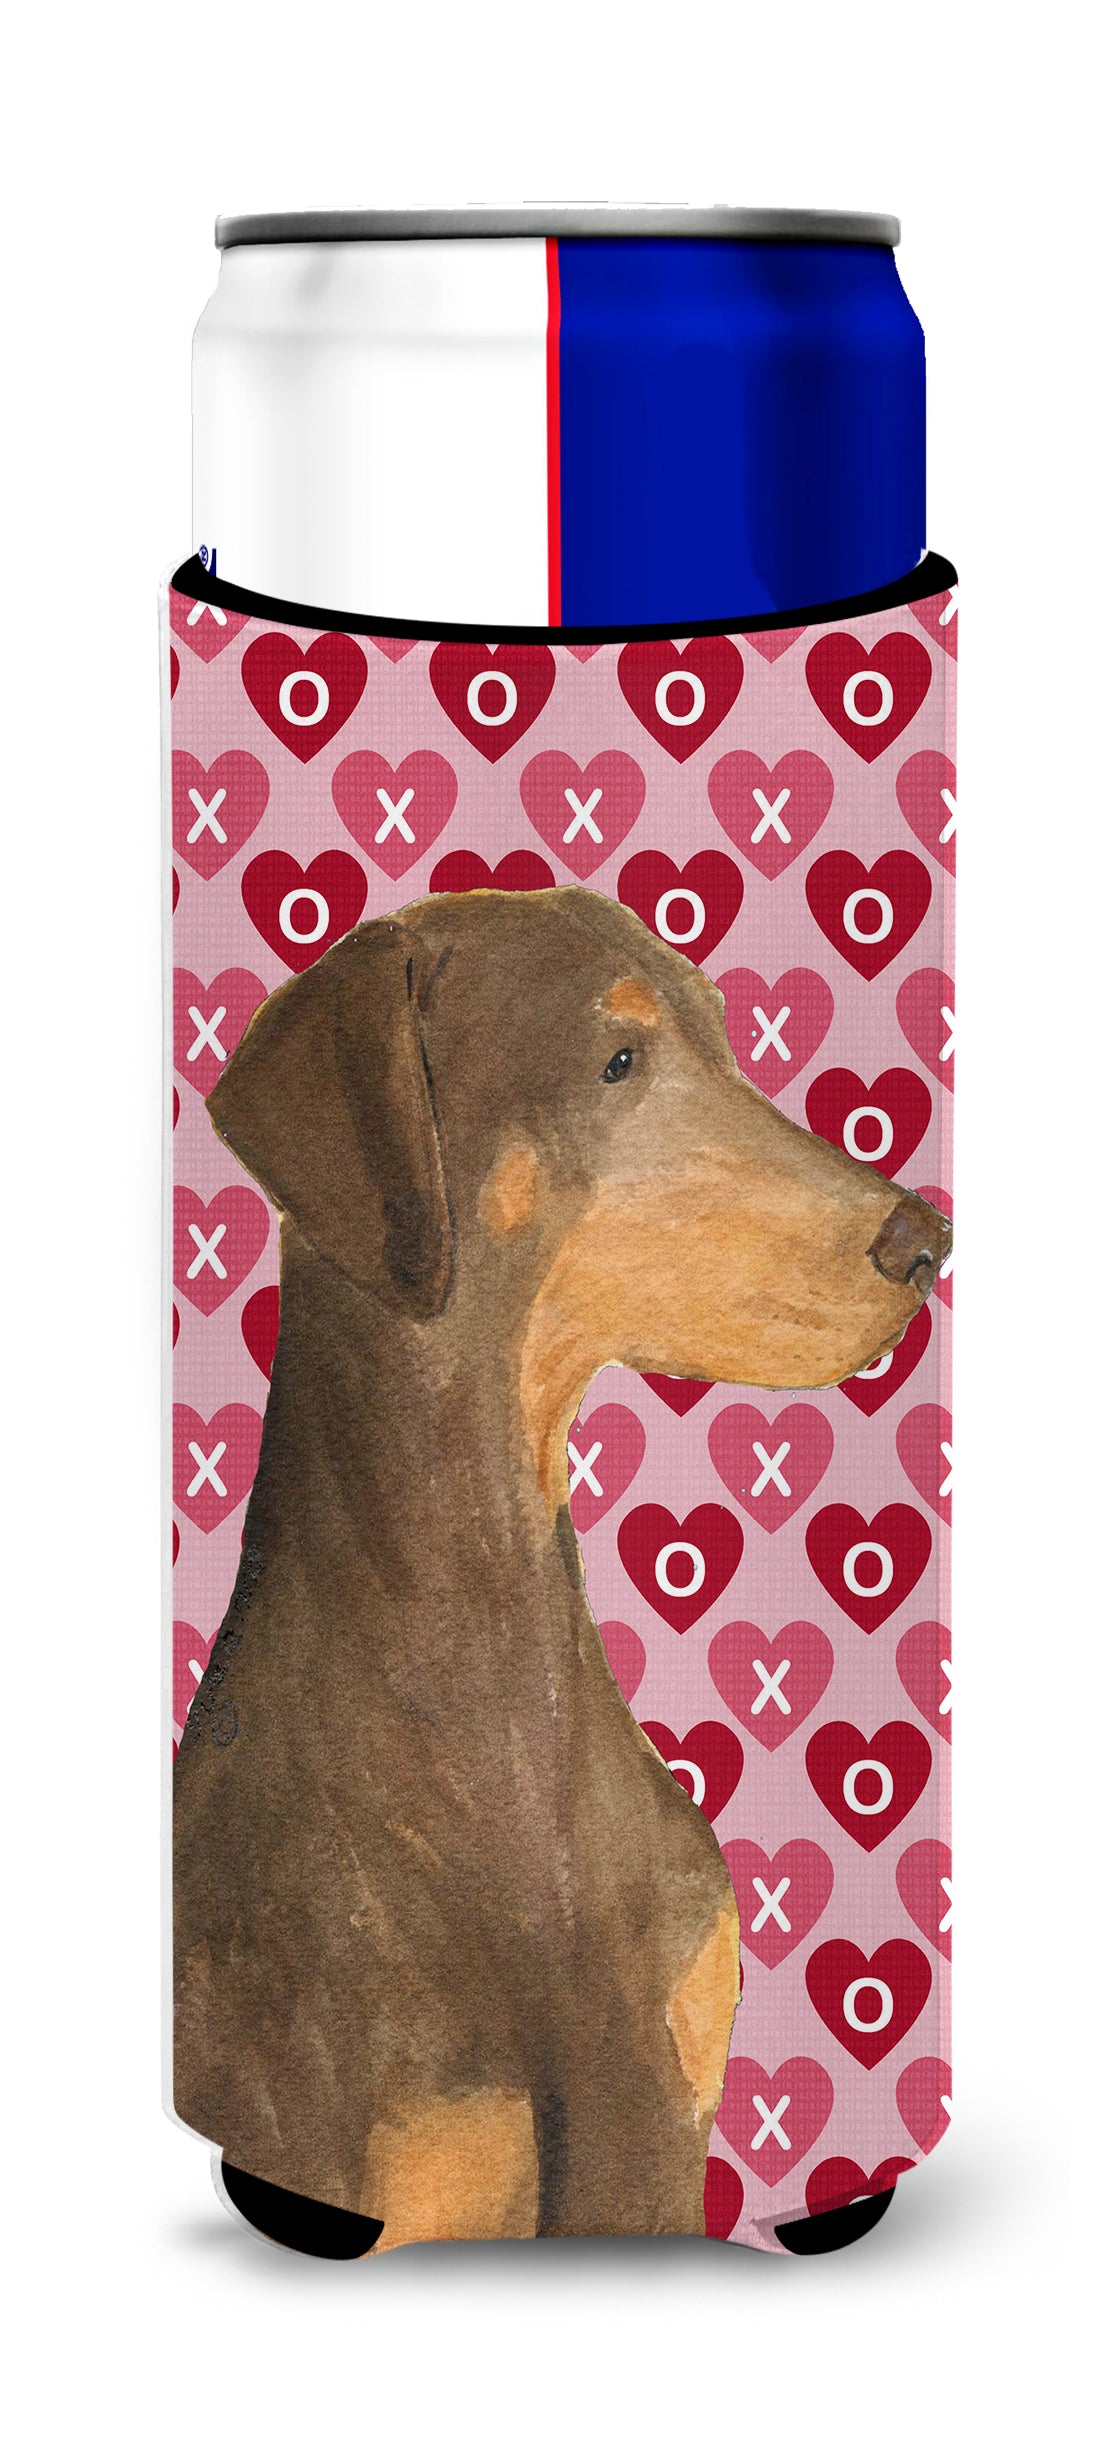 Doberman Hearts Love and Valentine's Day Portrait Ultra Beverage Insulators for slim cans SS4479MUK.